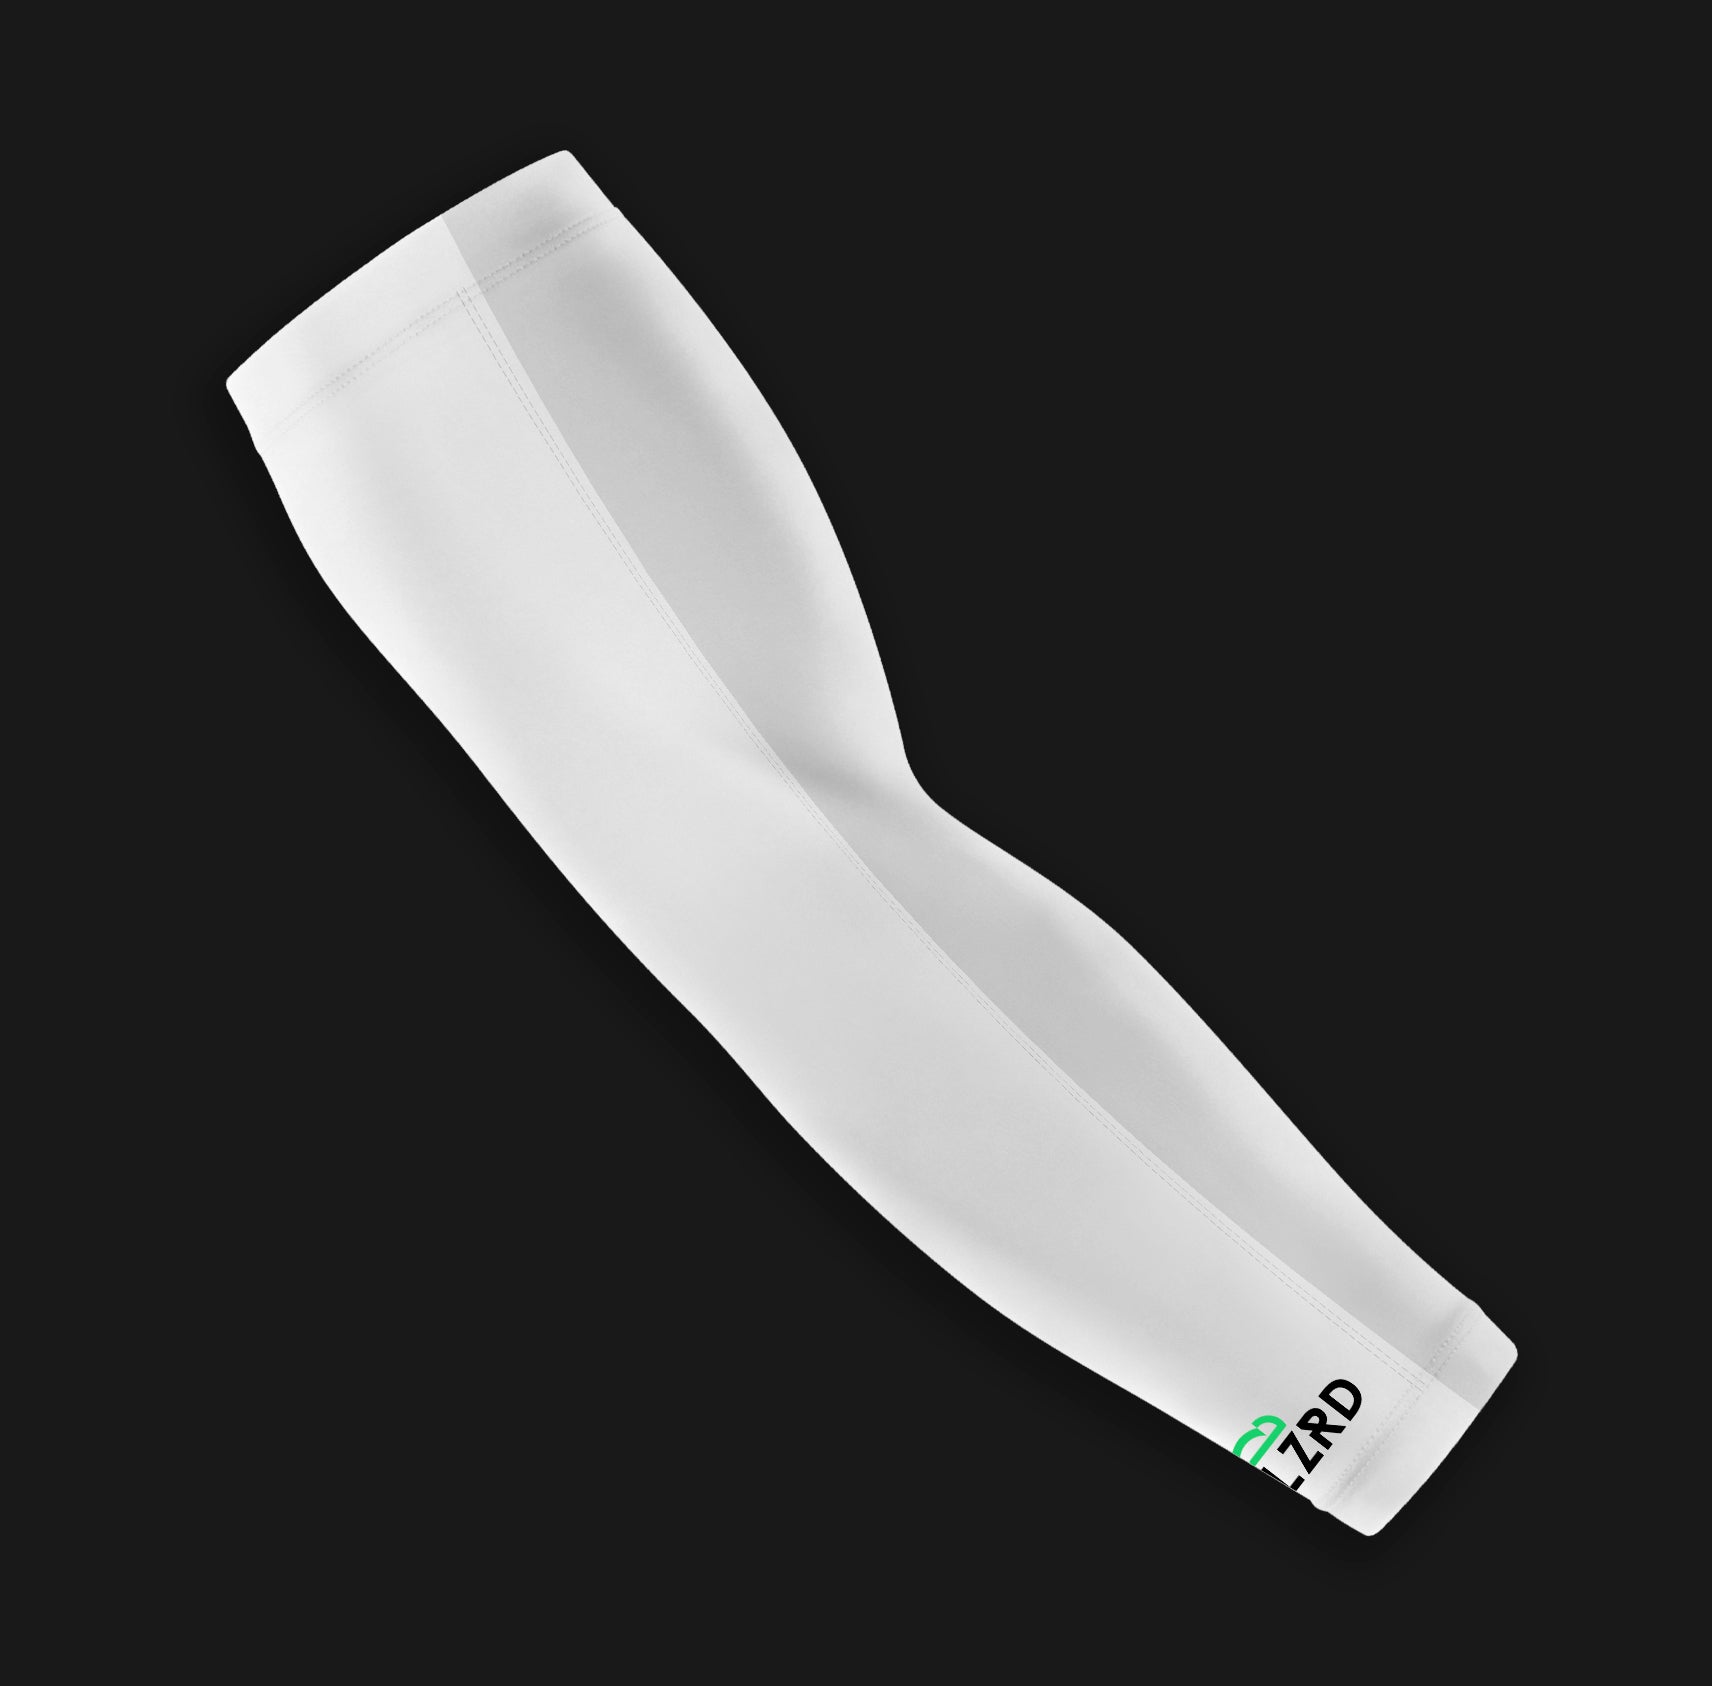 Performance Arm Sleeves for sale in Appleton, Wisconsin